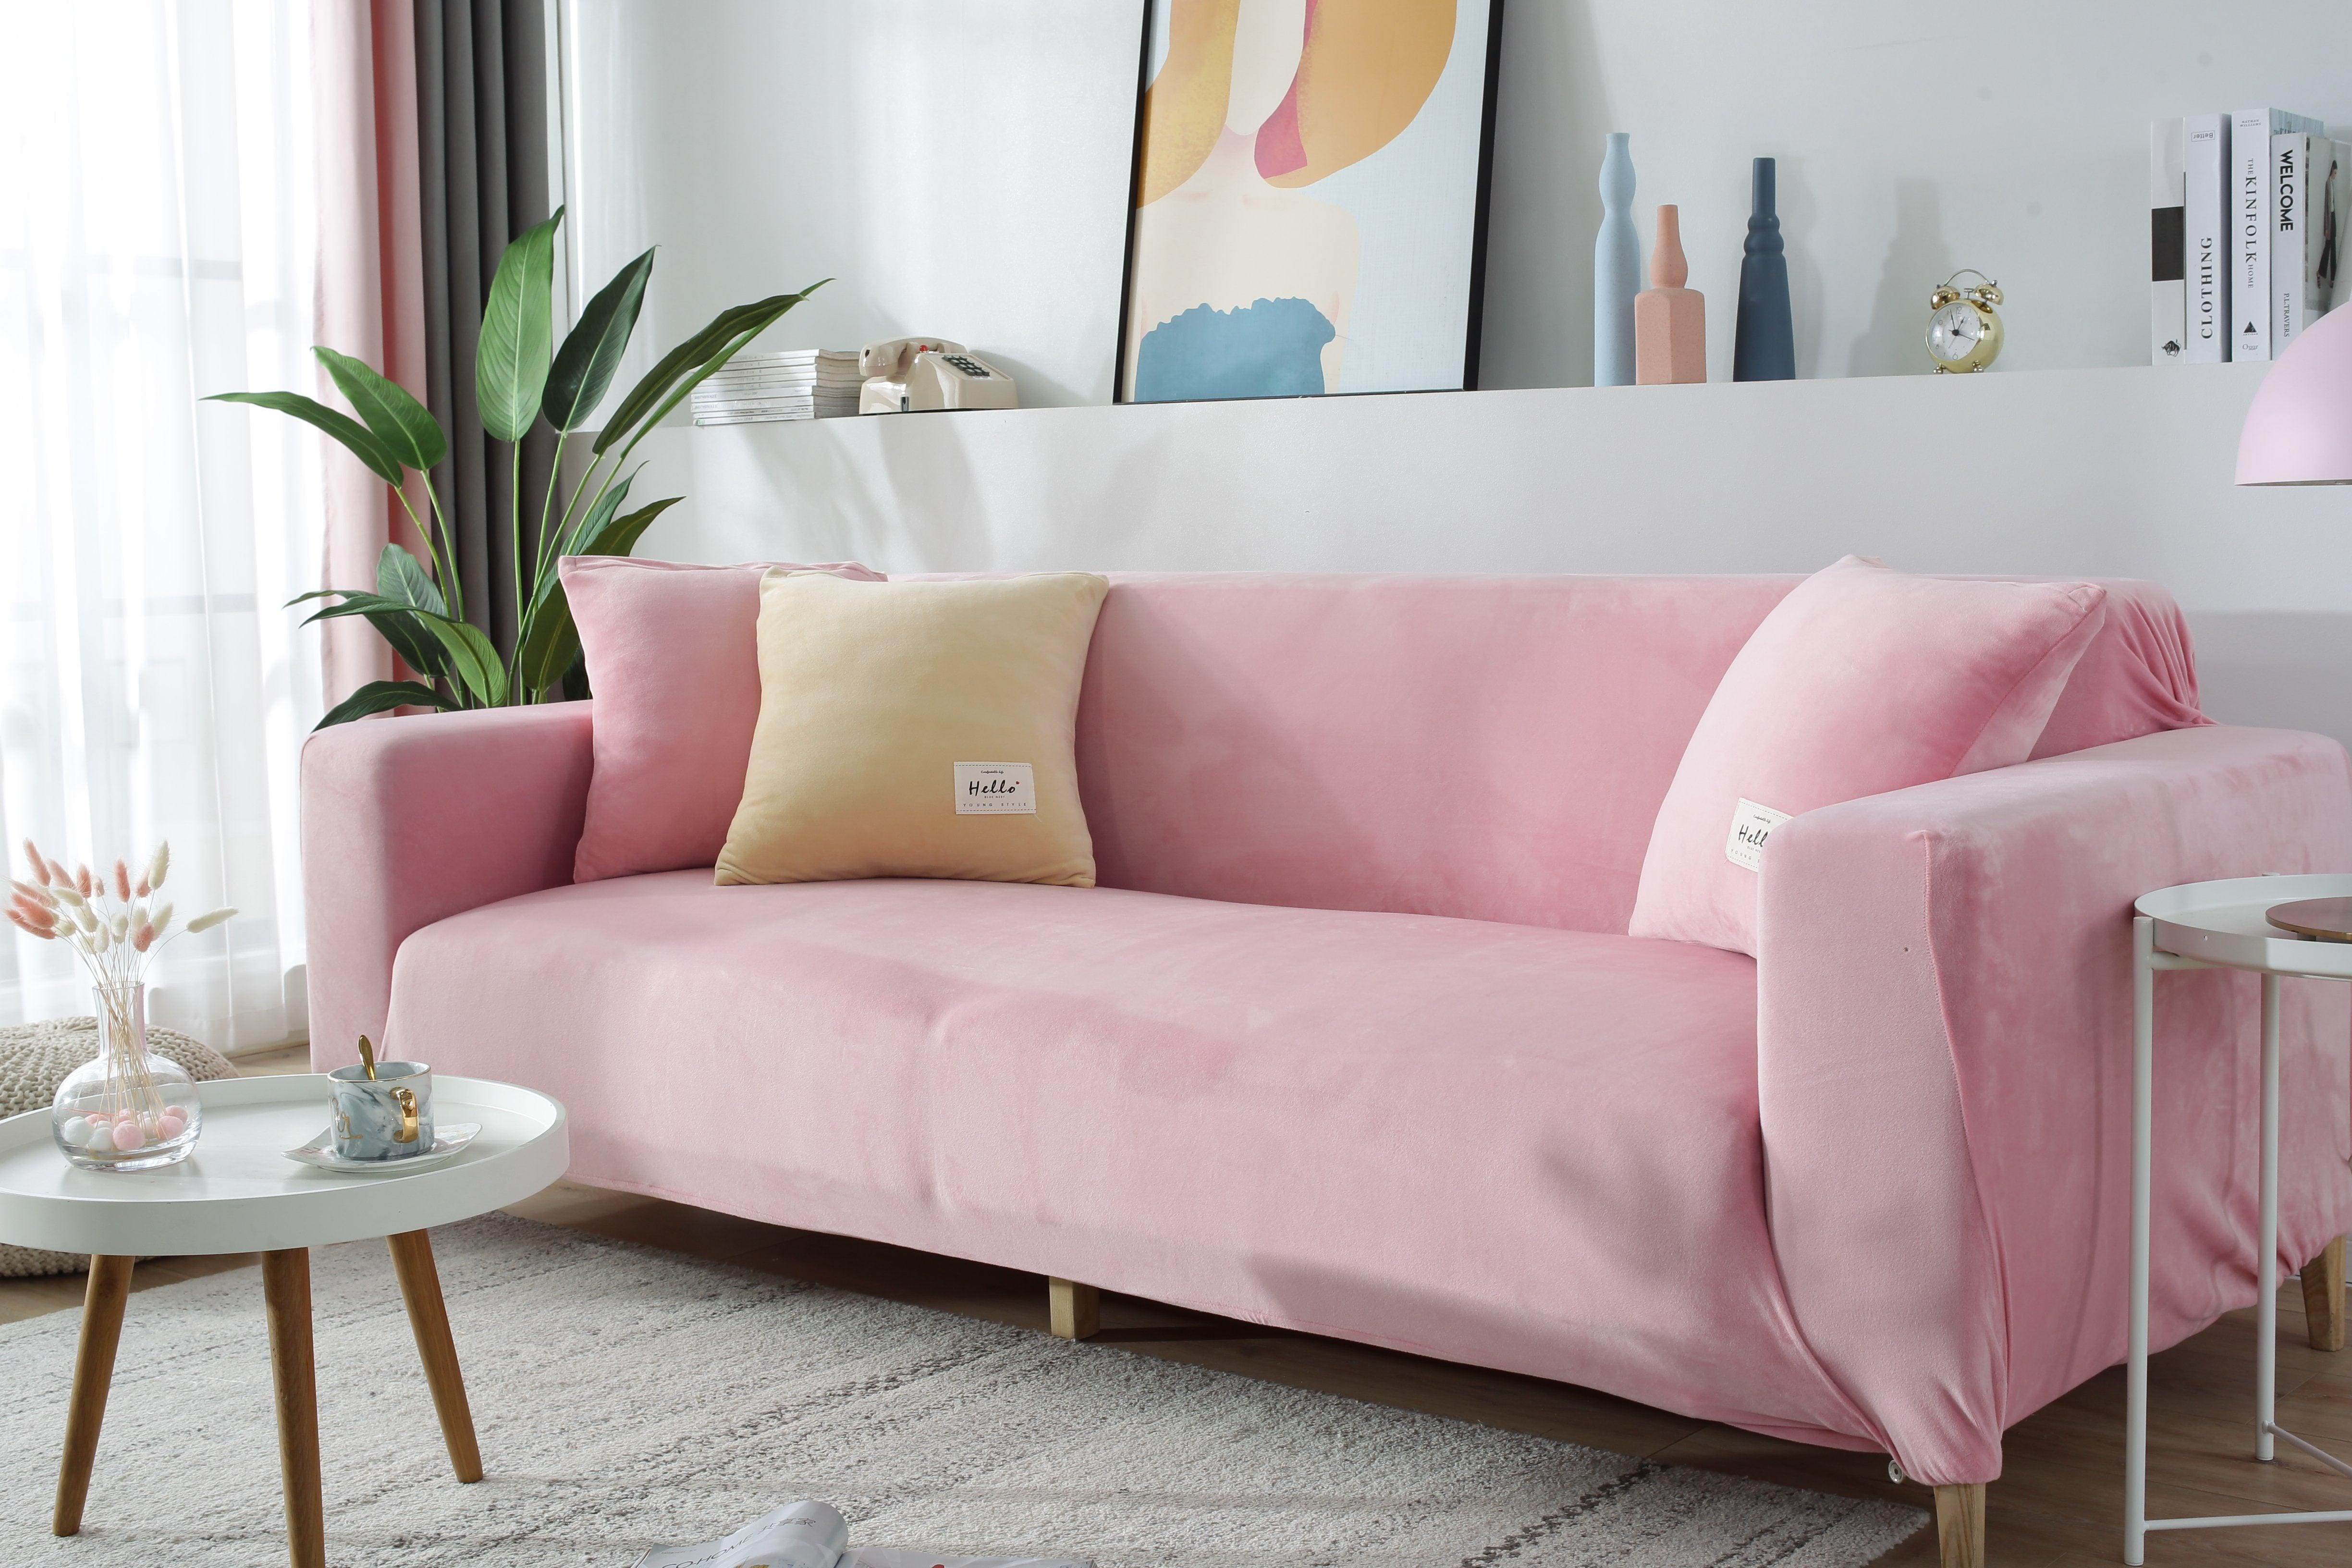 Sofa Cover - Velvet - Pink - Adaptable & Expandable - The Sofa Cover Crafter